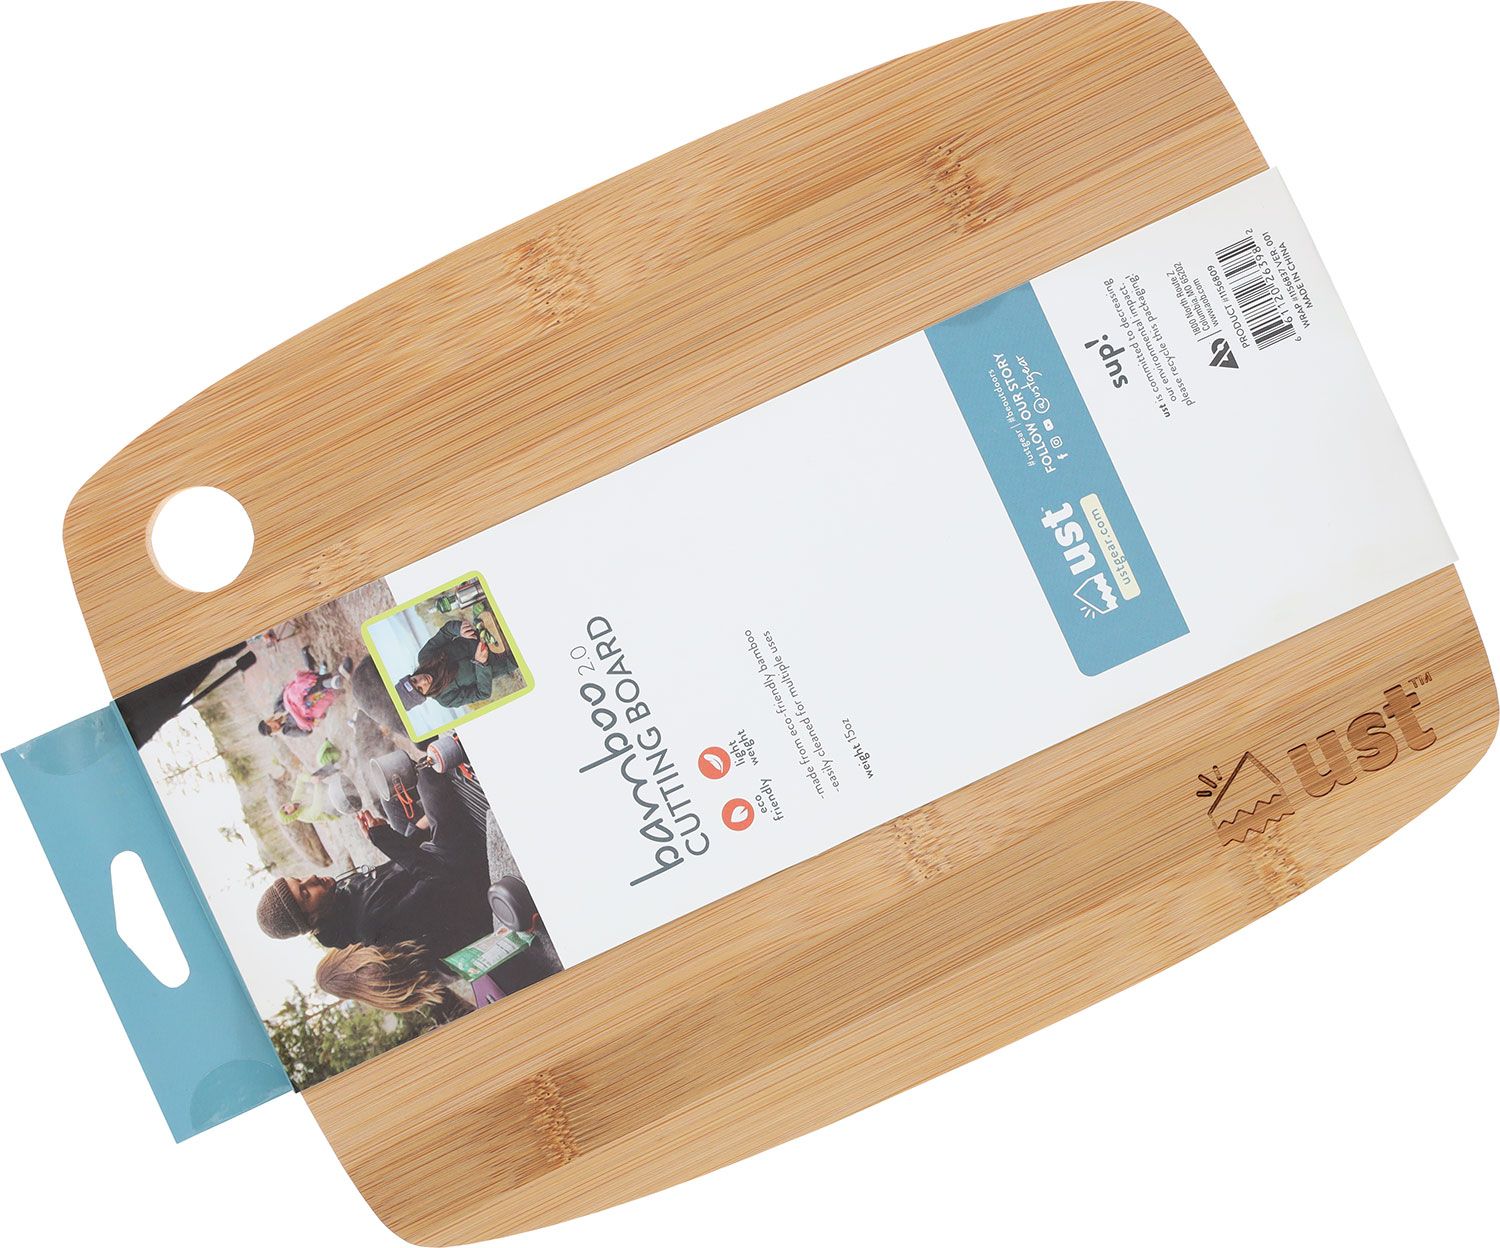 UST Bamboo Cutting Board with Eco-Friendly Construction, Moisture  Resistance and Space Saving Size for Camping, Hiking, Emergency and Outdoor  Survival